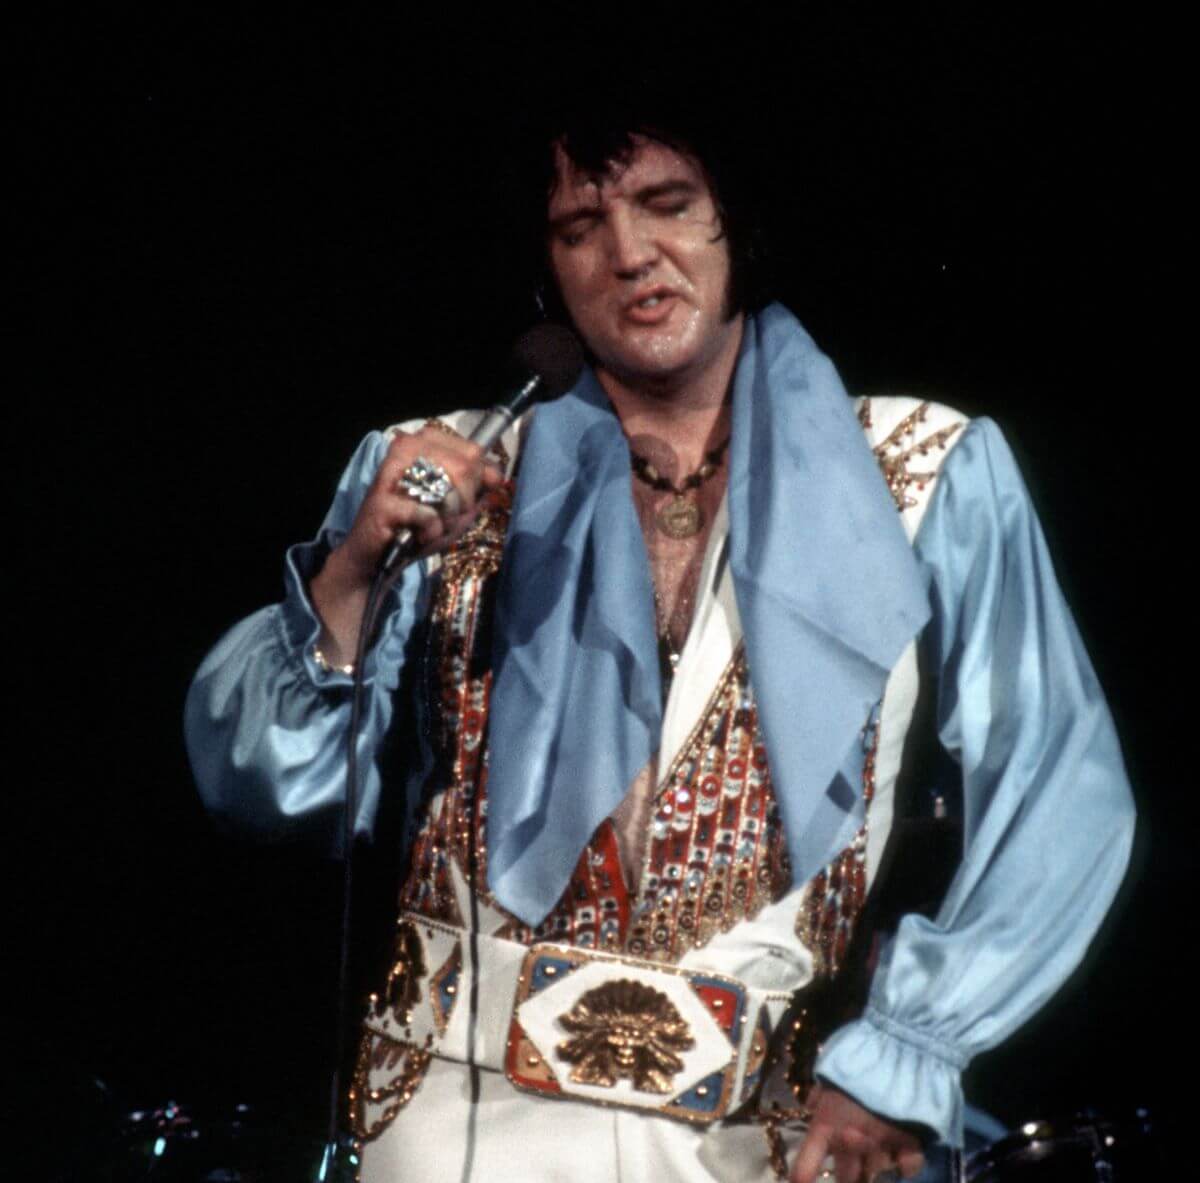 Elvis Presley wears a blue shirt and a bejeweled vest and belt. He sings into a microphone.